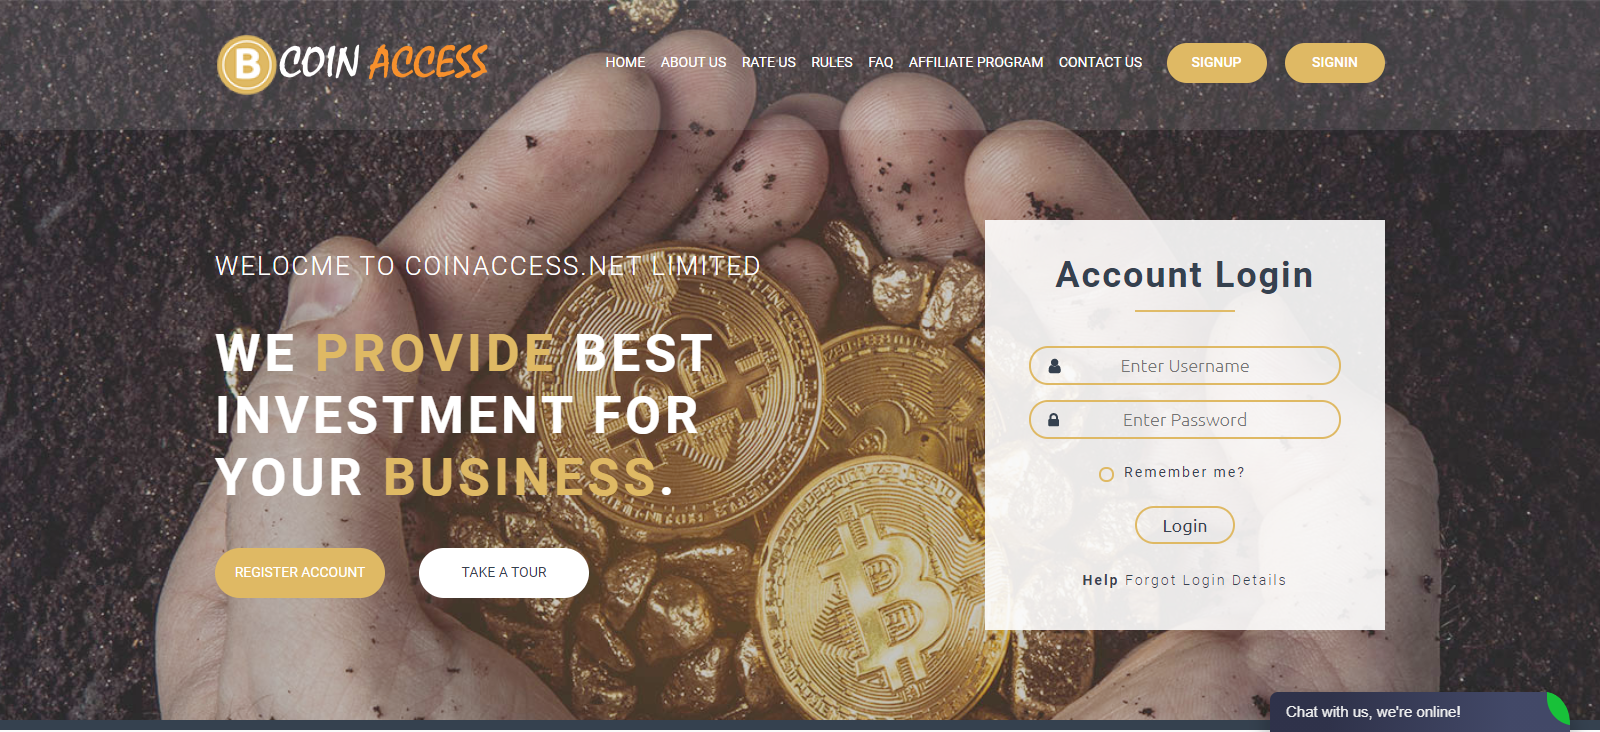 Coinacces.net Homepage Image